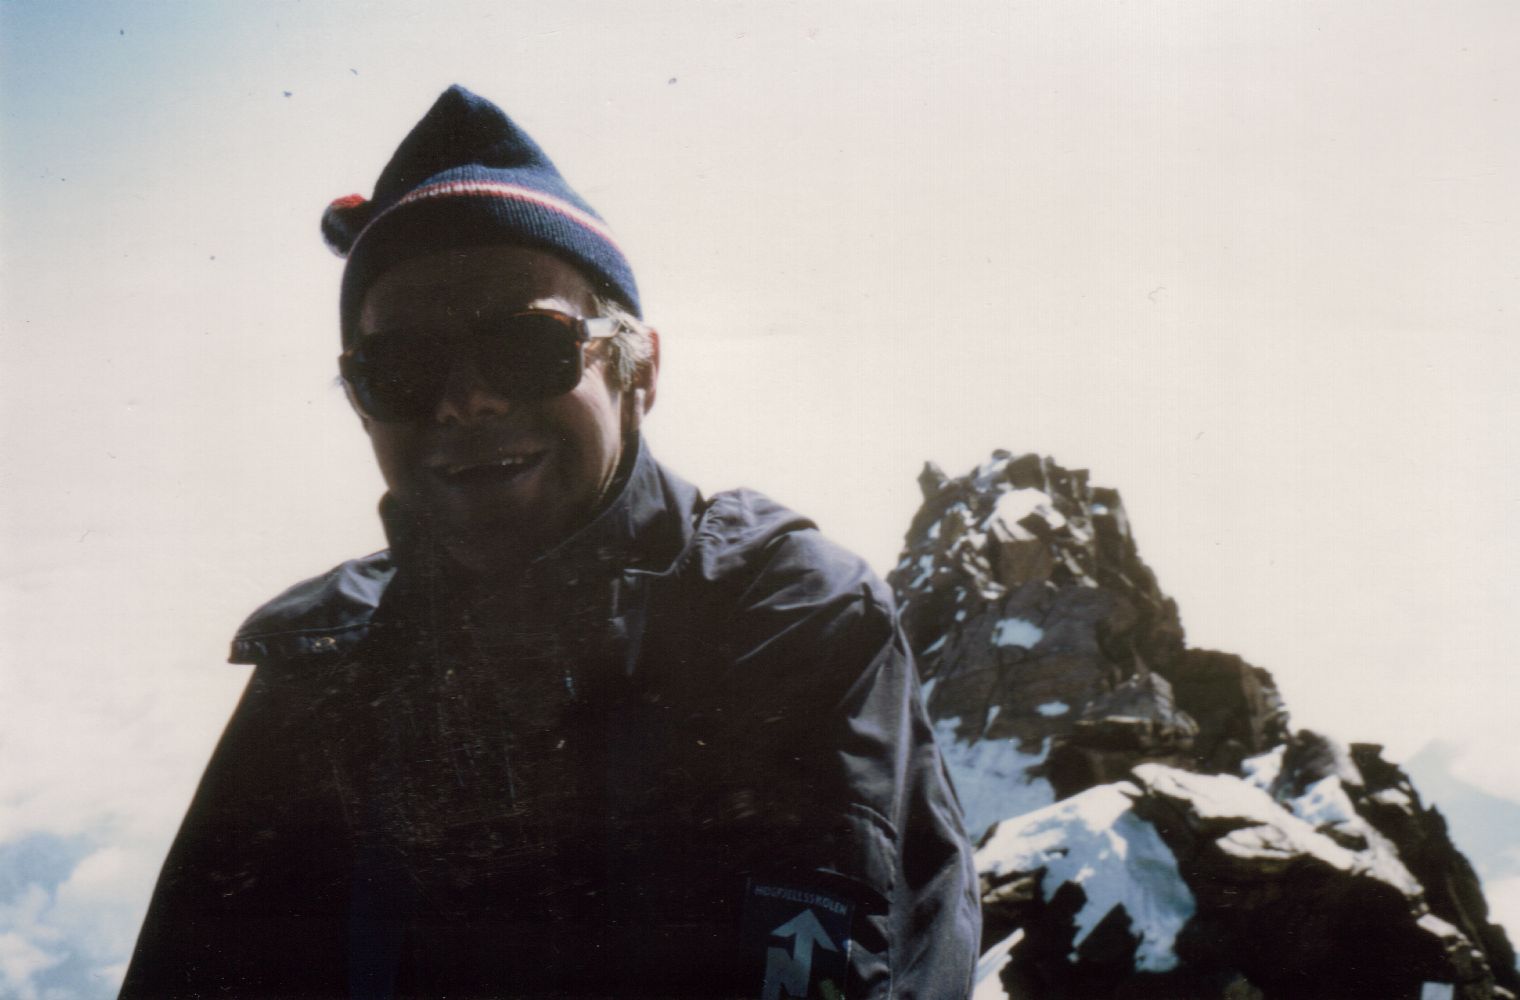 On the summit of Dufourspitze.jpg